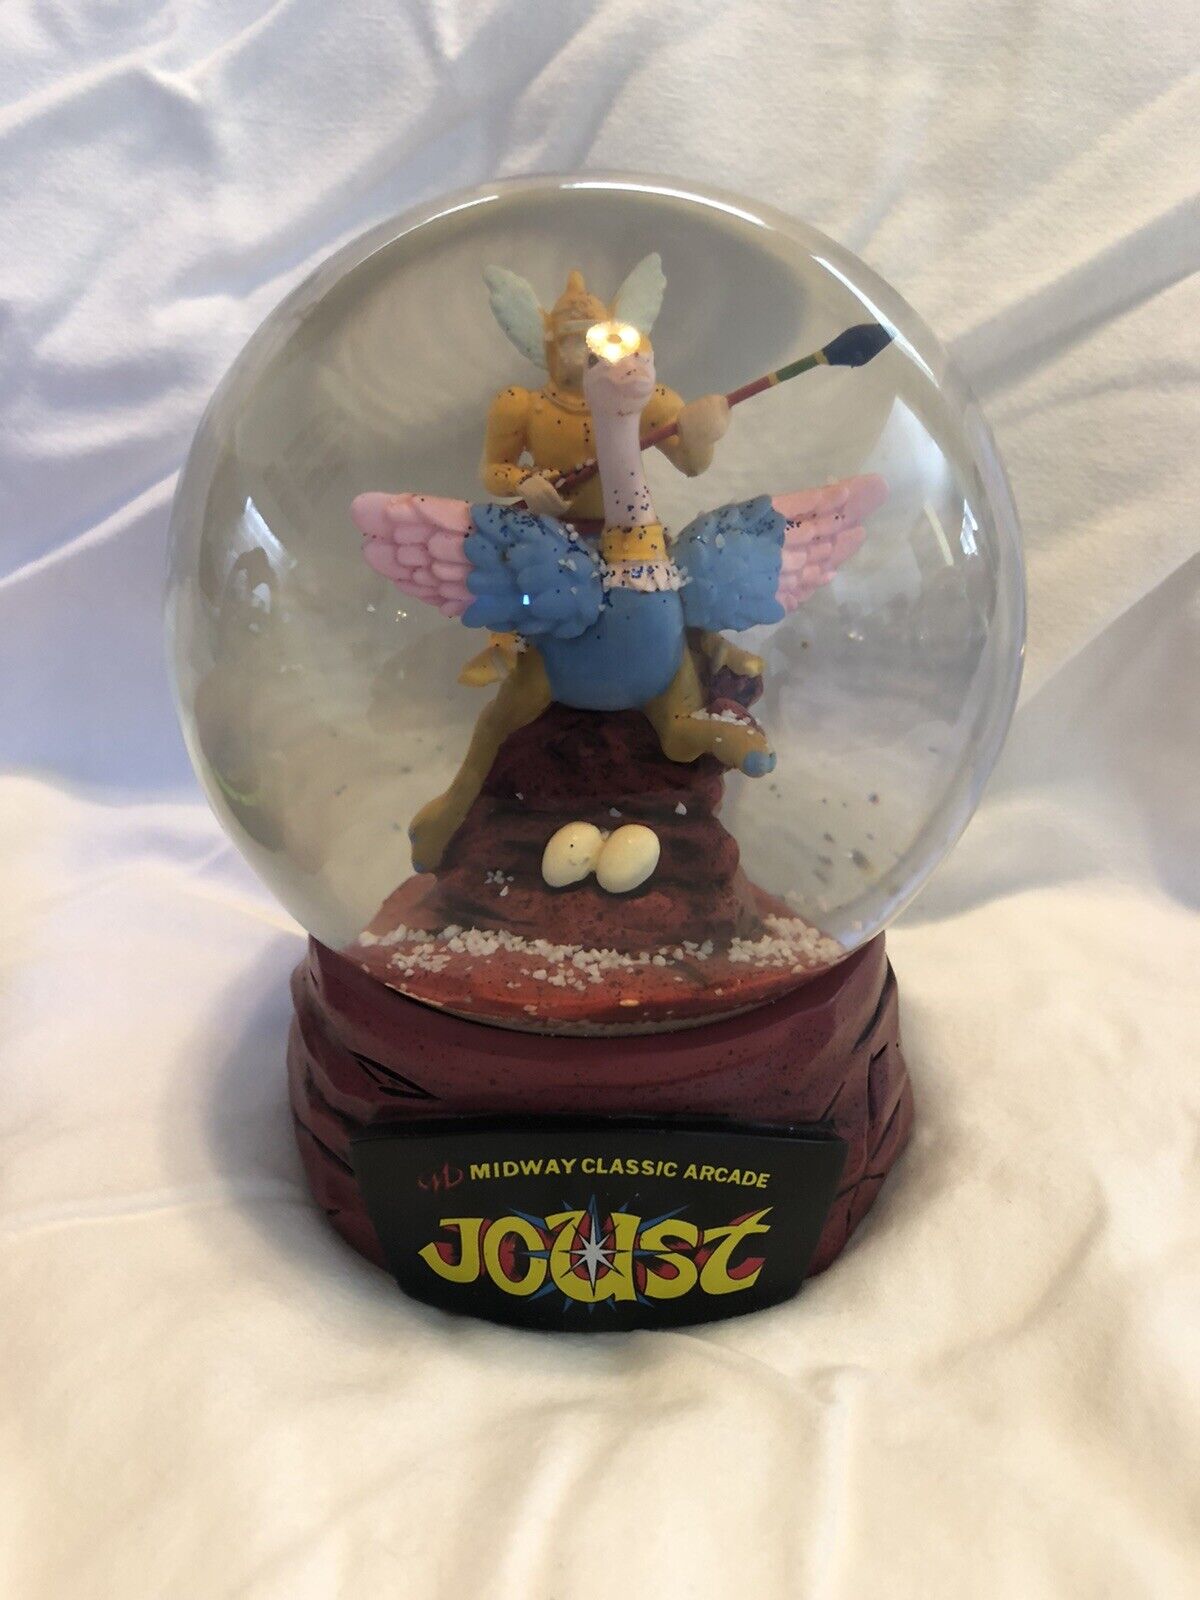 Midway Classic Arcade Joust Snowglobe Collectible [The Coop]